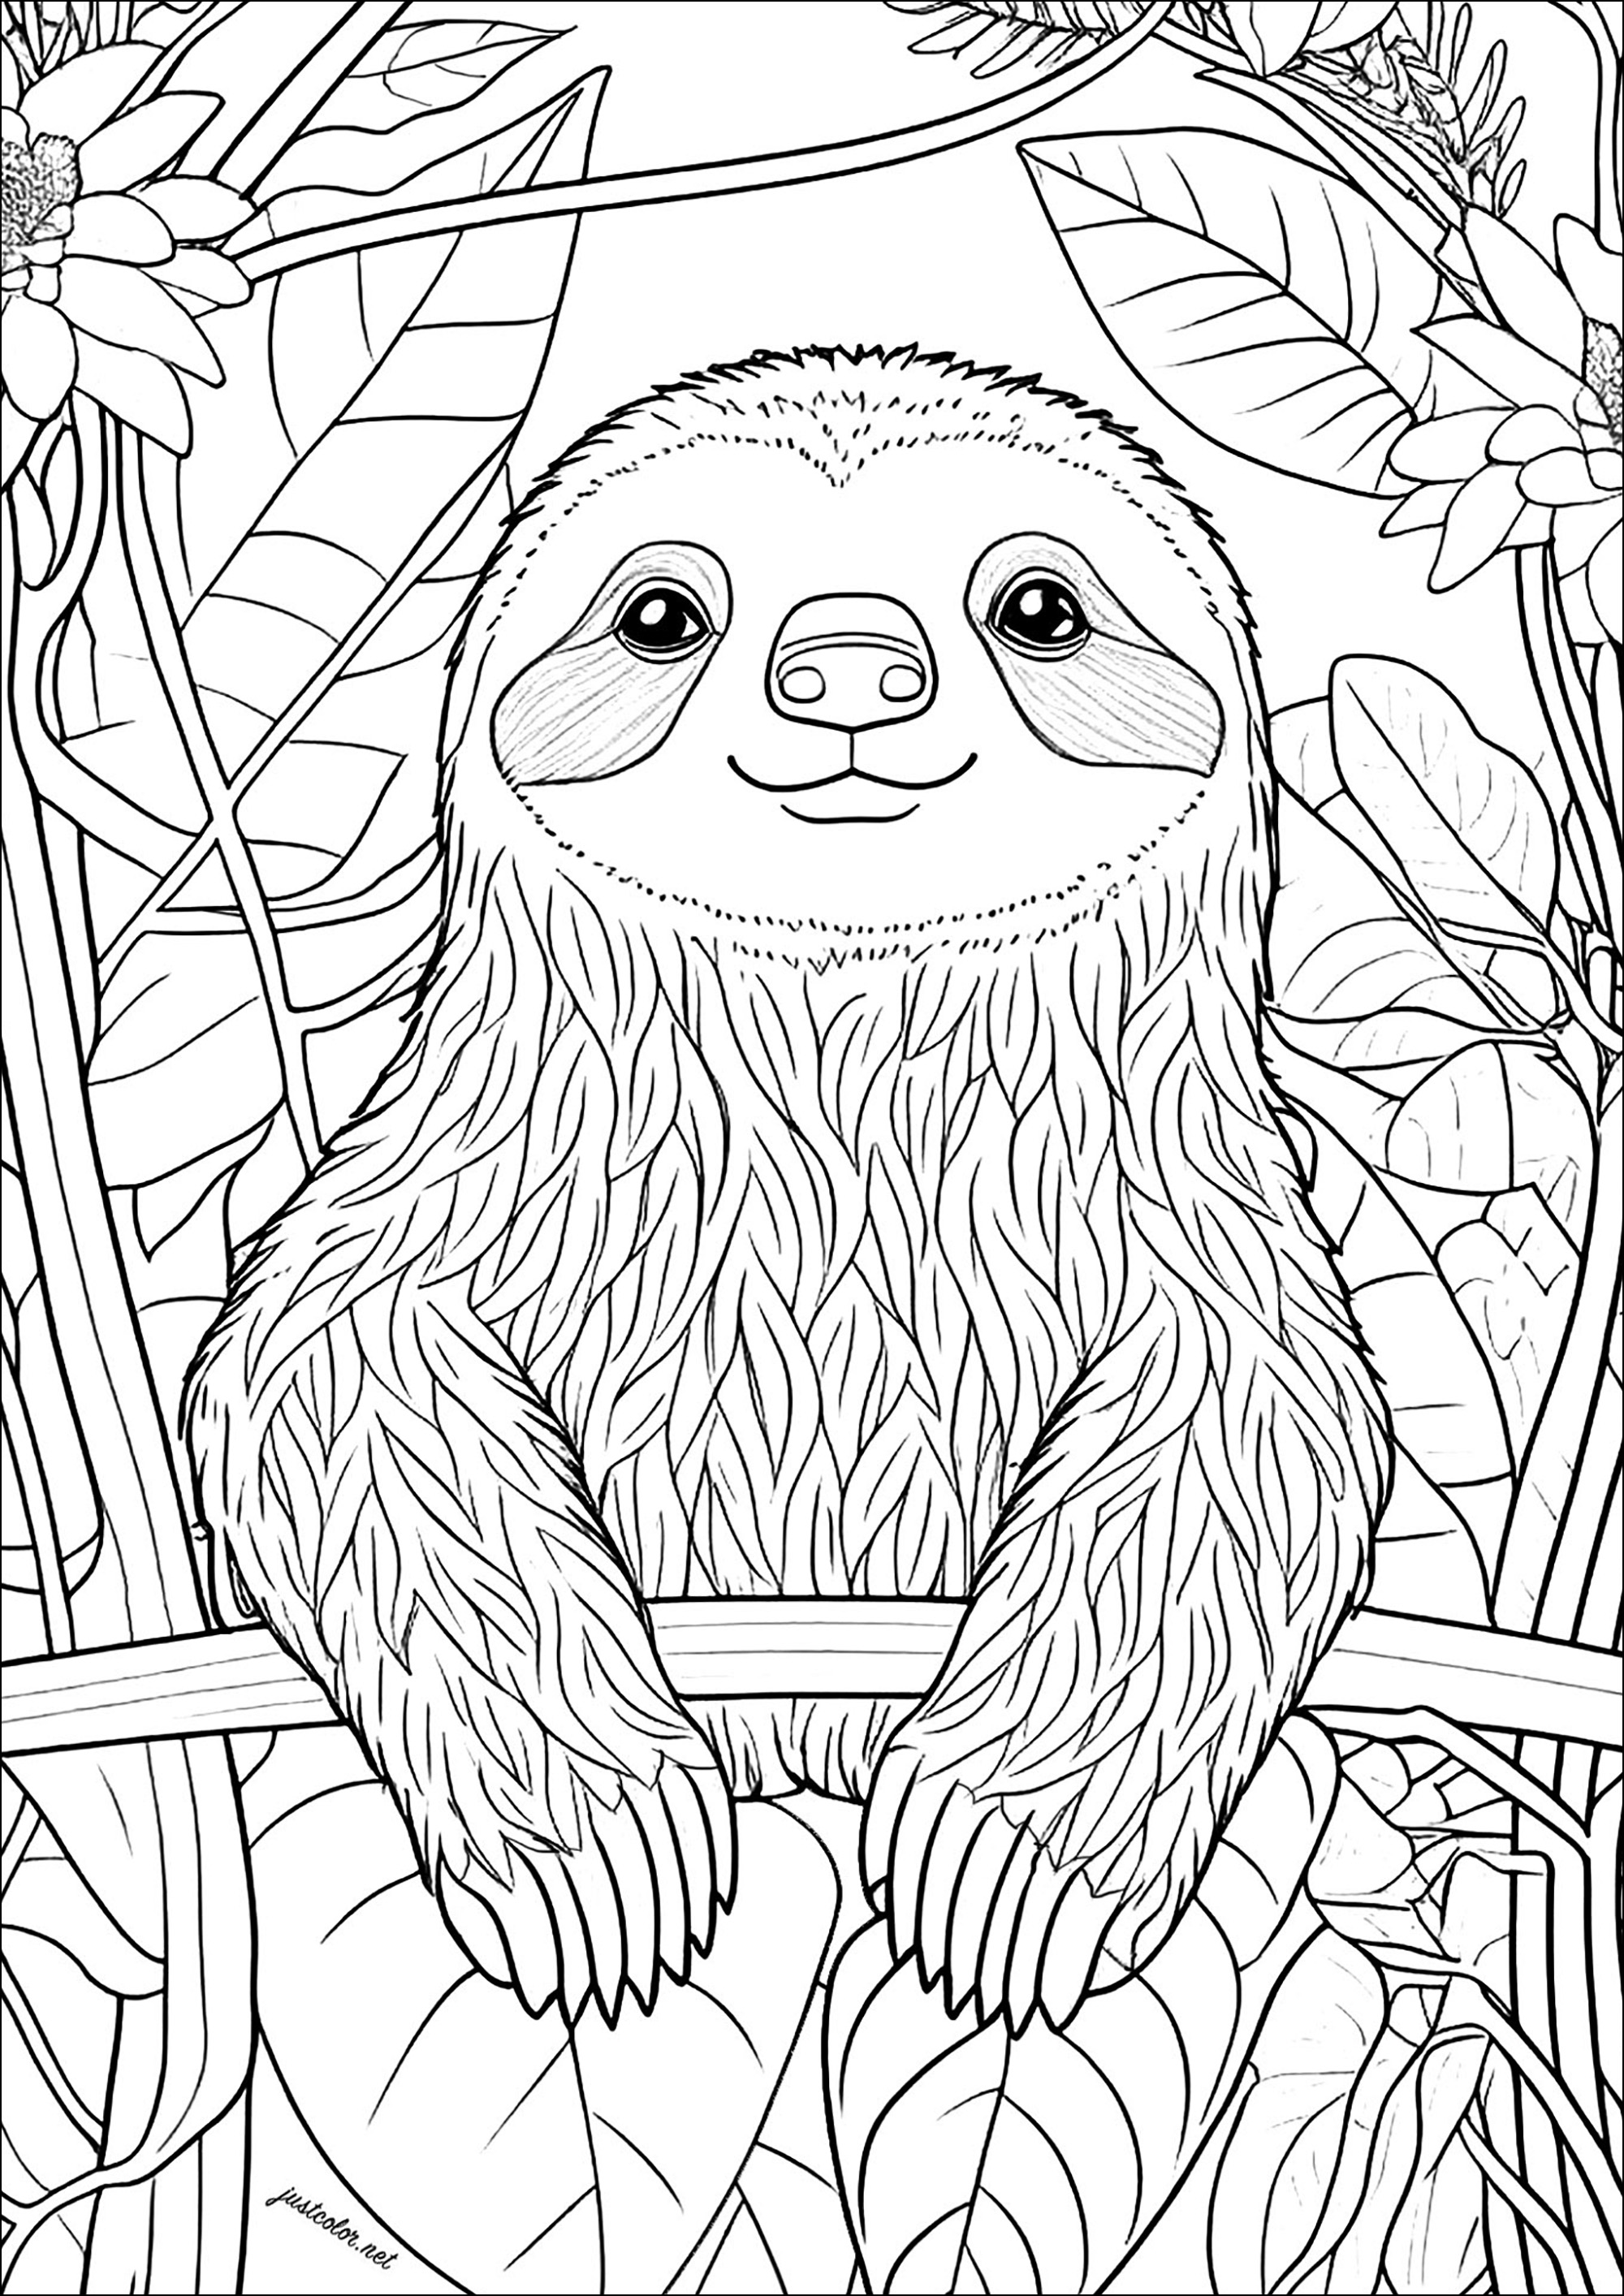 Pretty sloth in the forest